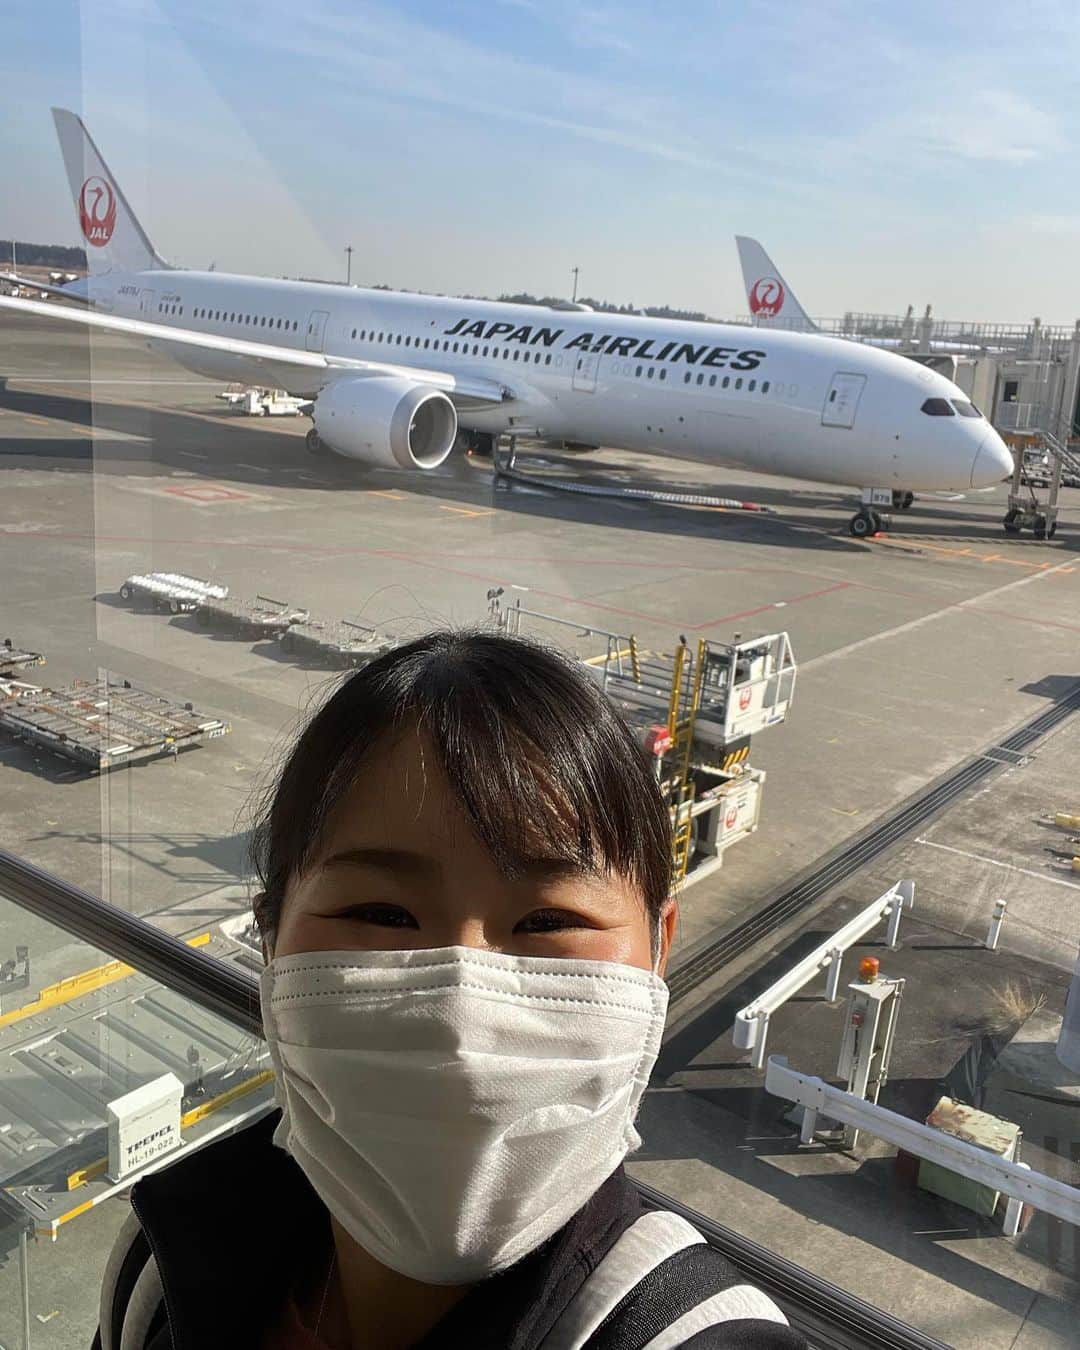 畑岡奈紗さんのインスタグラム写真 - (畑岡奈紗Instagram)「I turned 24! Thank you all for your kind messages😊 I will continue to do my best!   Also my first flight of 2023 was birthday flight to the US✈️✨ @japanairlines_jal celebrated me during this flight and I got an amazing strawberries from a farm operated near the airport🍓 It smelled so sweet even when it was in the box. I was really happy to receive my favorite fruit as a gift♪   When I turned 20, four years ago, I went to the United States on my birthday, and the coming-of-age ceremony was on the same day, so I remember going out in a hurry lol😂   So this was my 2nd birthday flight ✈️ This time, I was able to travel to the United States with peace and comfort with the flight with @japanairlines_jal, who has been supporting me since I turned professional, and it became a wonderful memory. Thanks JAL for such an amazing support 😌   I'll do my best in the season opening match!  24歳になりました！ お祝いメッセージありがとうございます😊 これからも感謝の気持ちを持って頑張って参ります！  そして、今年初の渡米でバースデーフライトでした✈️✨ @japanairlines_jal 様にお祝いして頂きました！ 空港の近くで運営されている農園で採れたイチゴを頂きました🍓 箱に入ったままでも香る甘〜い匂いに実際頂いてもとっても甘く美味しかったです😋 大好きなイチゴのプレゼント嬉しかったです♪  実は4年前の20歳の時も誕生日に渡米して、成人式も同日だったのでバタバタと出かけたのを覚えています笑😂  2回目のバースデーフライト✈️ 今回もプロ転向当初からサポートして頂いている @japanairlines_jal 様のフライトで安心して渡米出来たこととても良い思い出になりました。 未だコロナの影響で大変な中サポートして頂ける事感謝申し上げます。 いつも本当にありがとうございます😌  開幕戦頑張ります！  #2023初フライト #バースデーフライト  #24」1月14日 20時06分 - nasahataoka